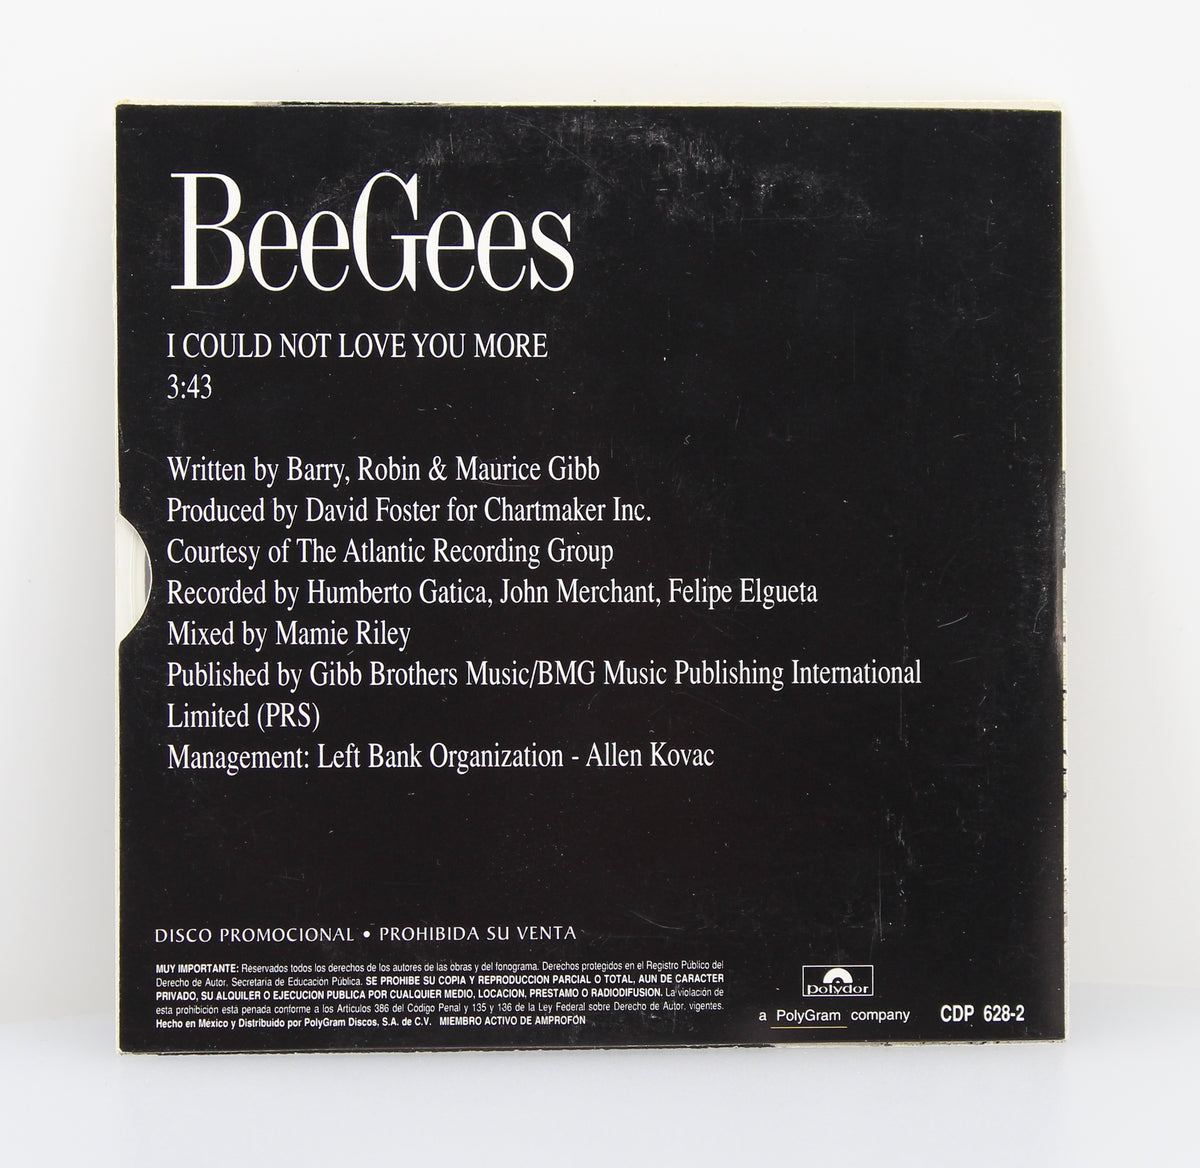 Bee Gees - I Could Not Love You More, CD Single Promo, Mexico